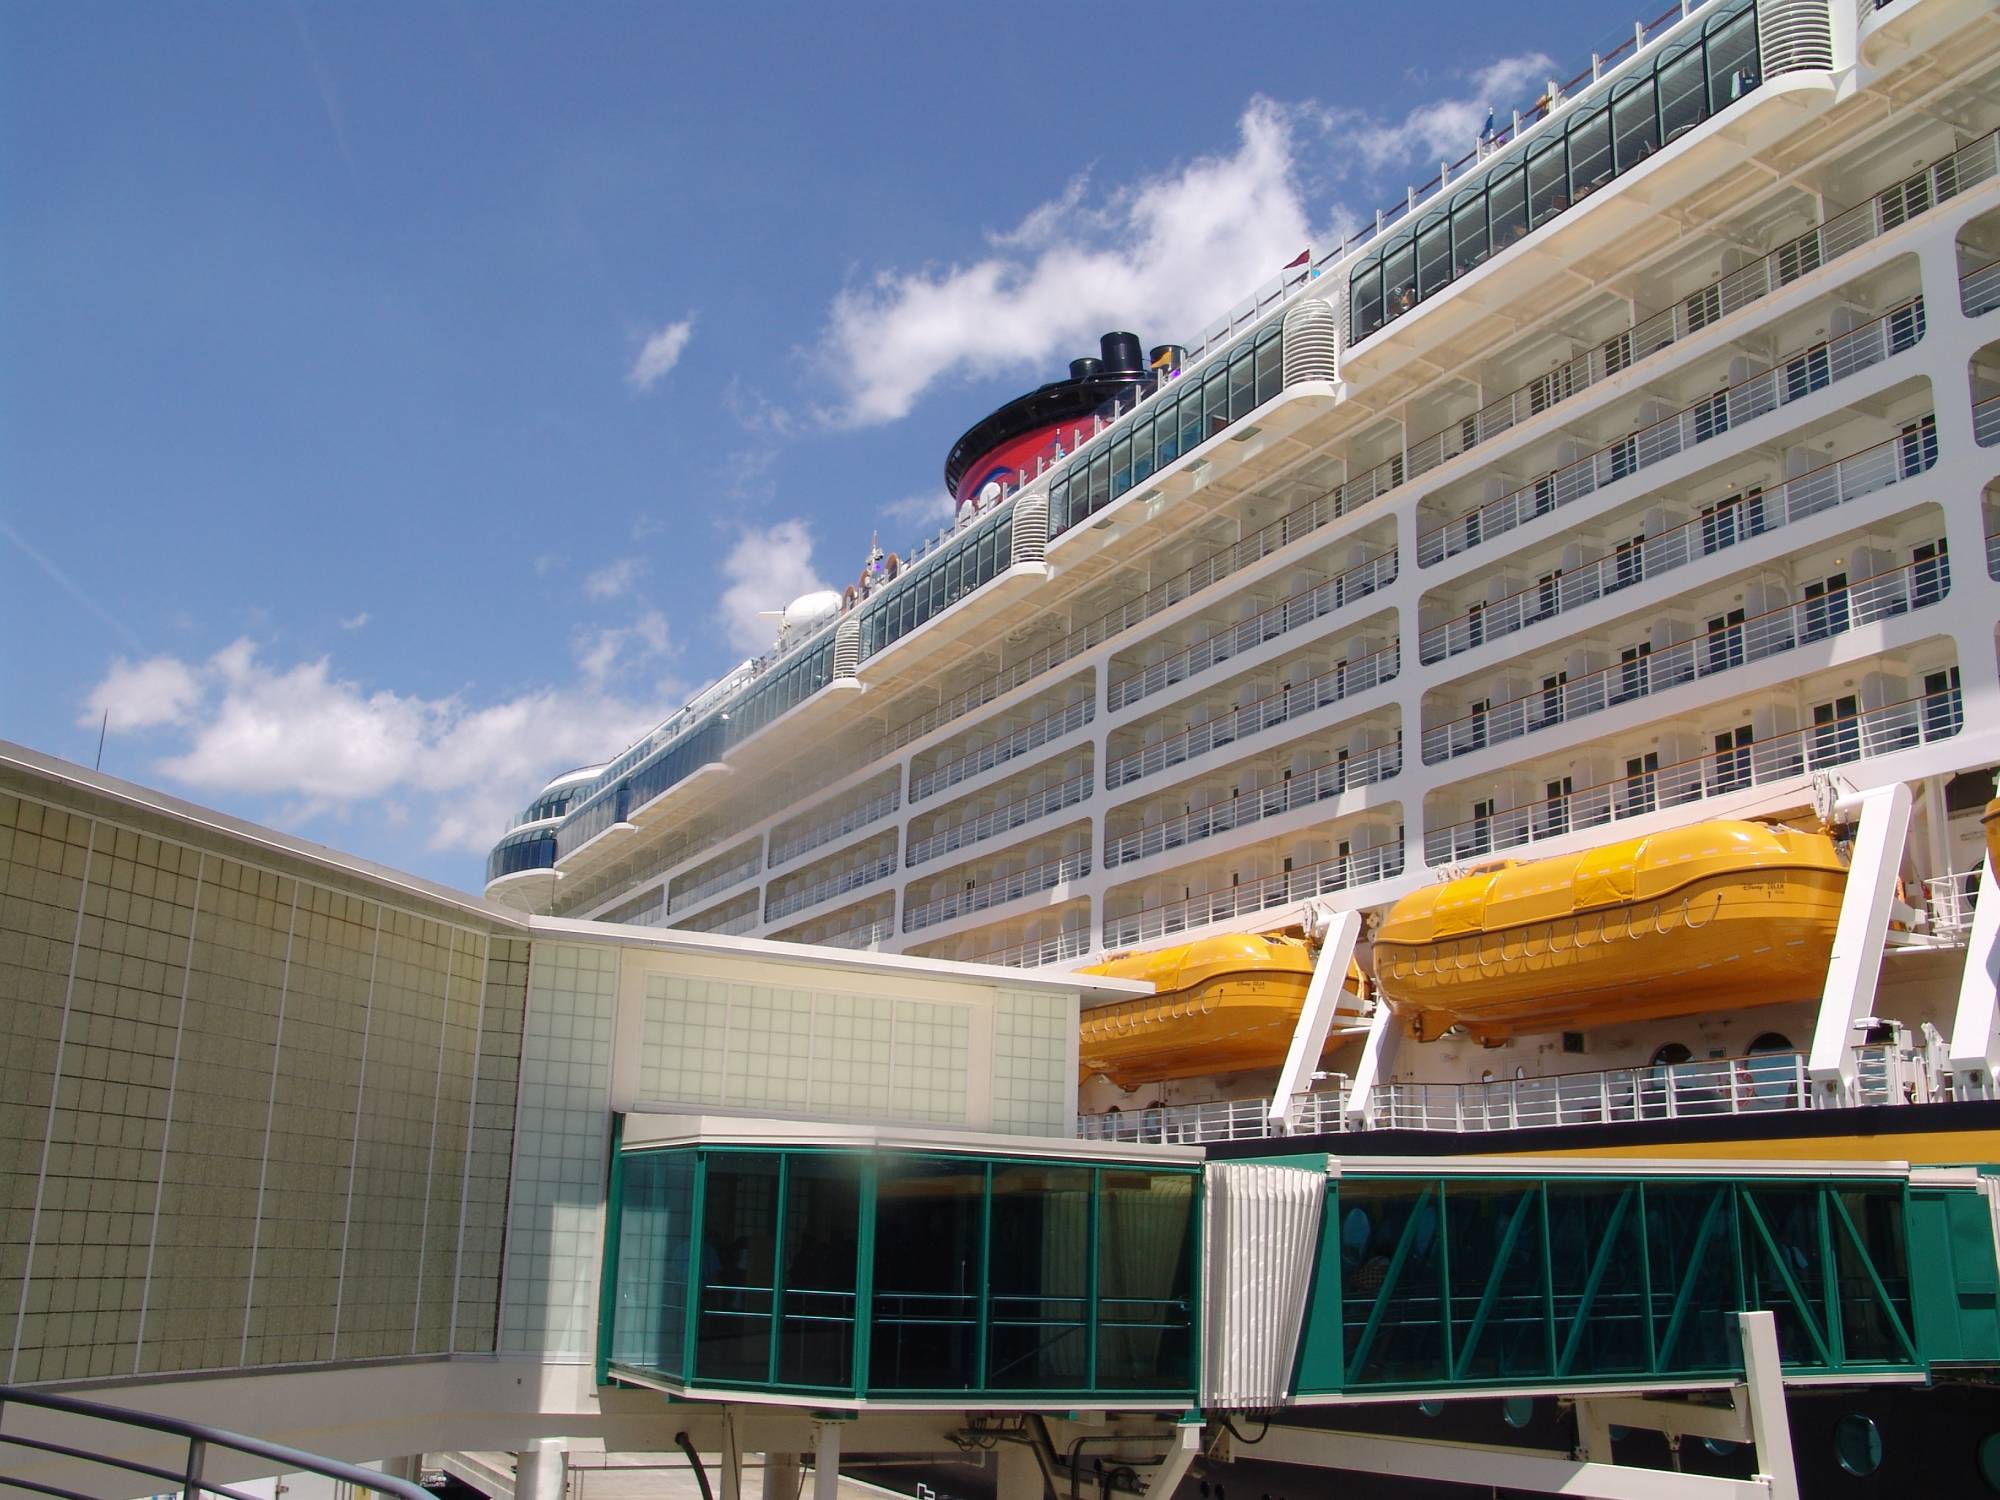 Disney Dream - view from terminal